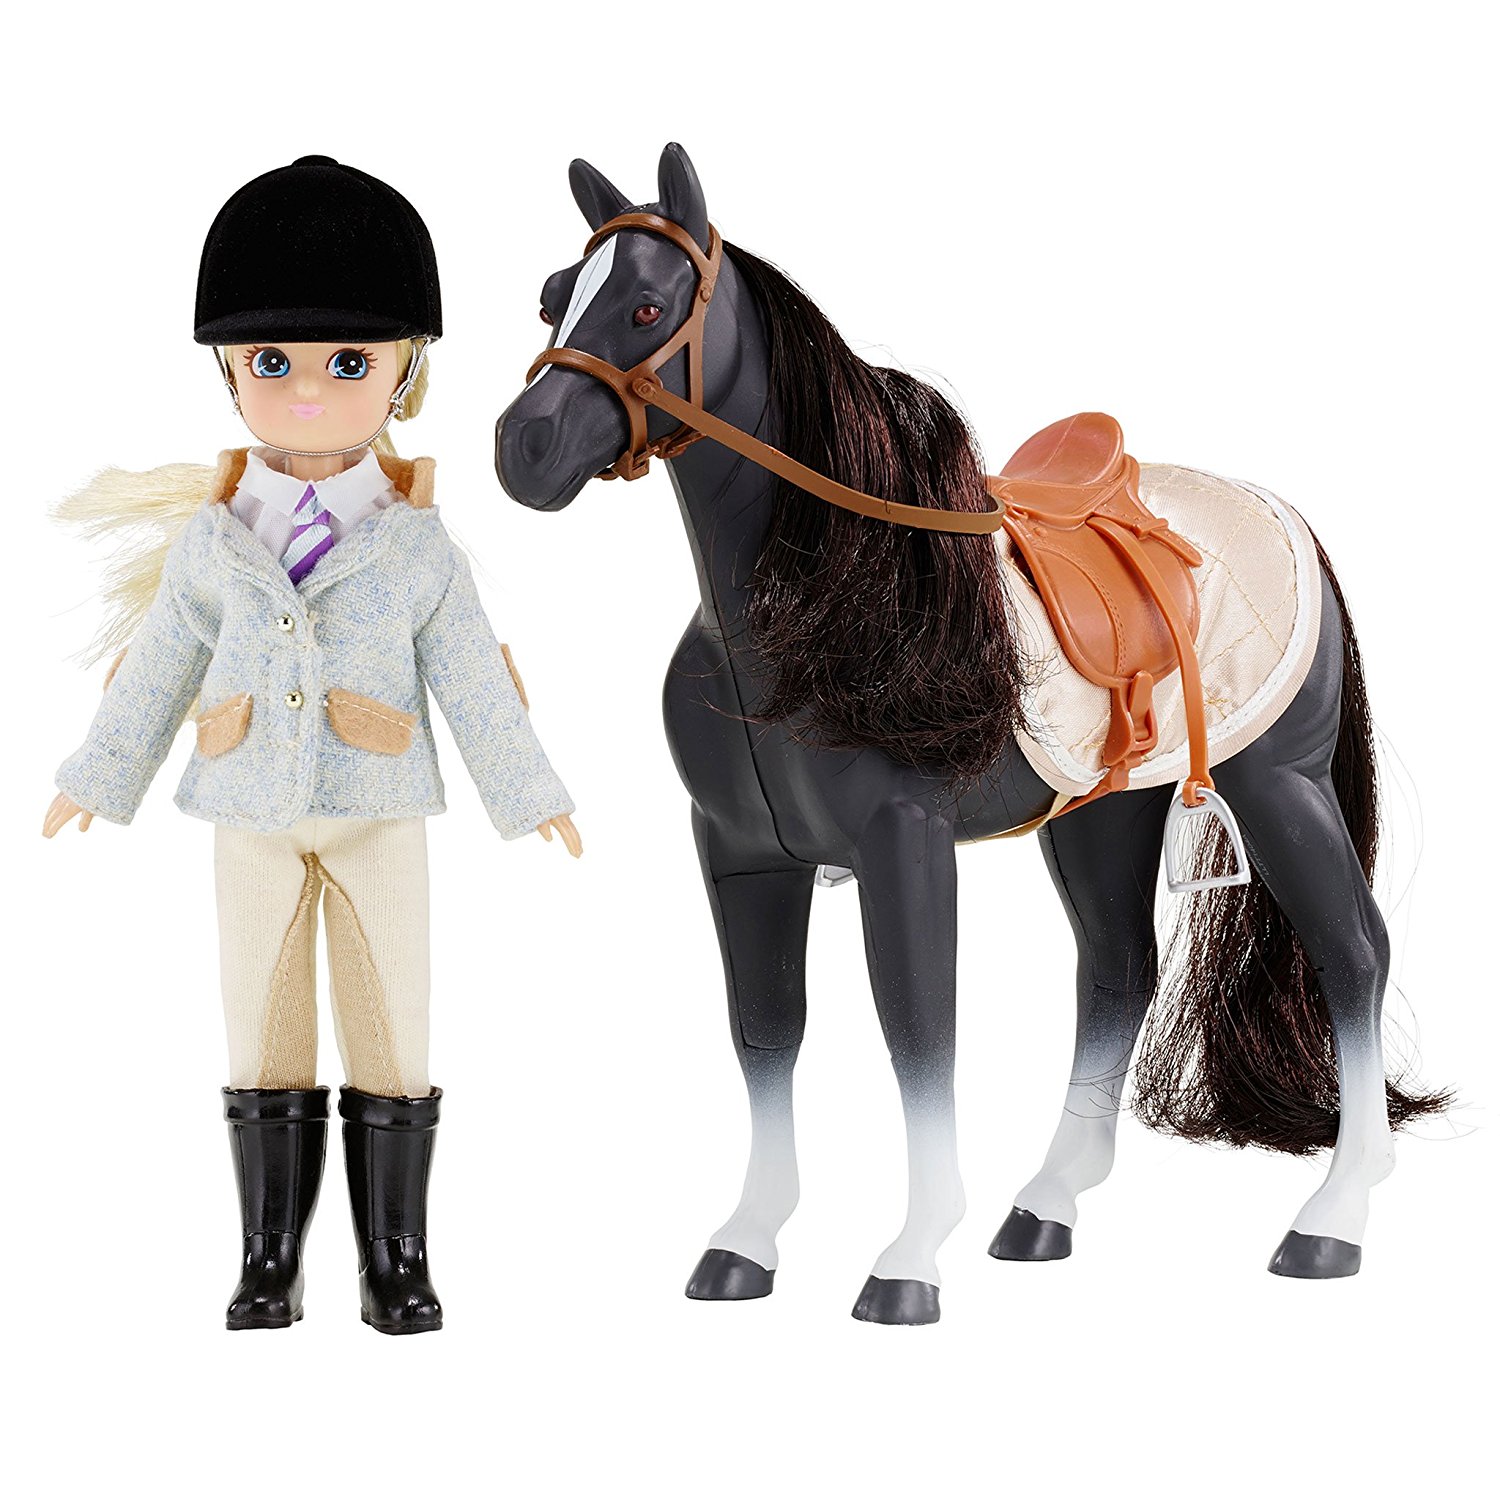 Lottie Doll Set with Horse - Doll & Pony - Blond Hair And Blue Eyes ...